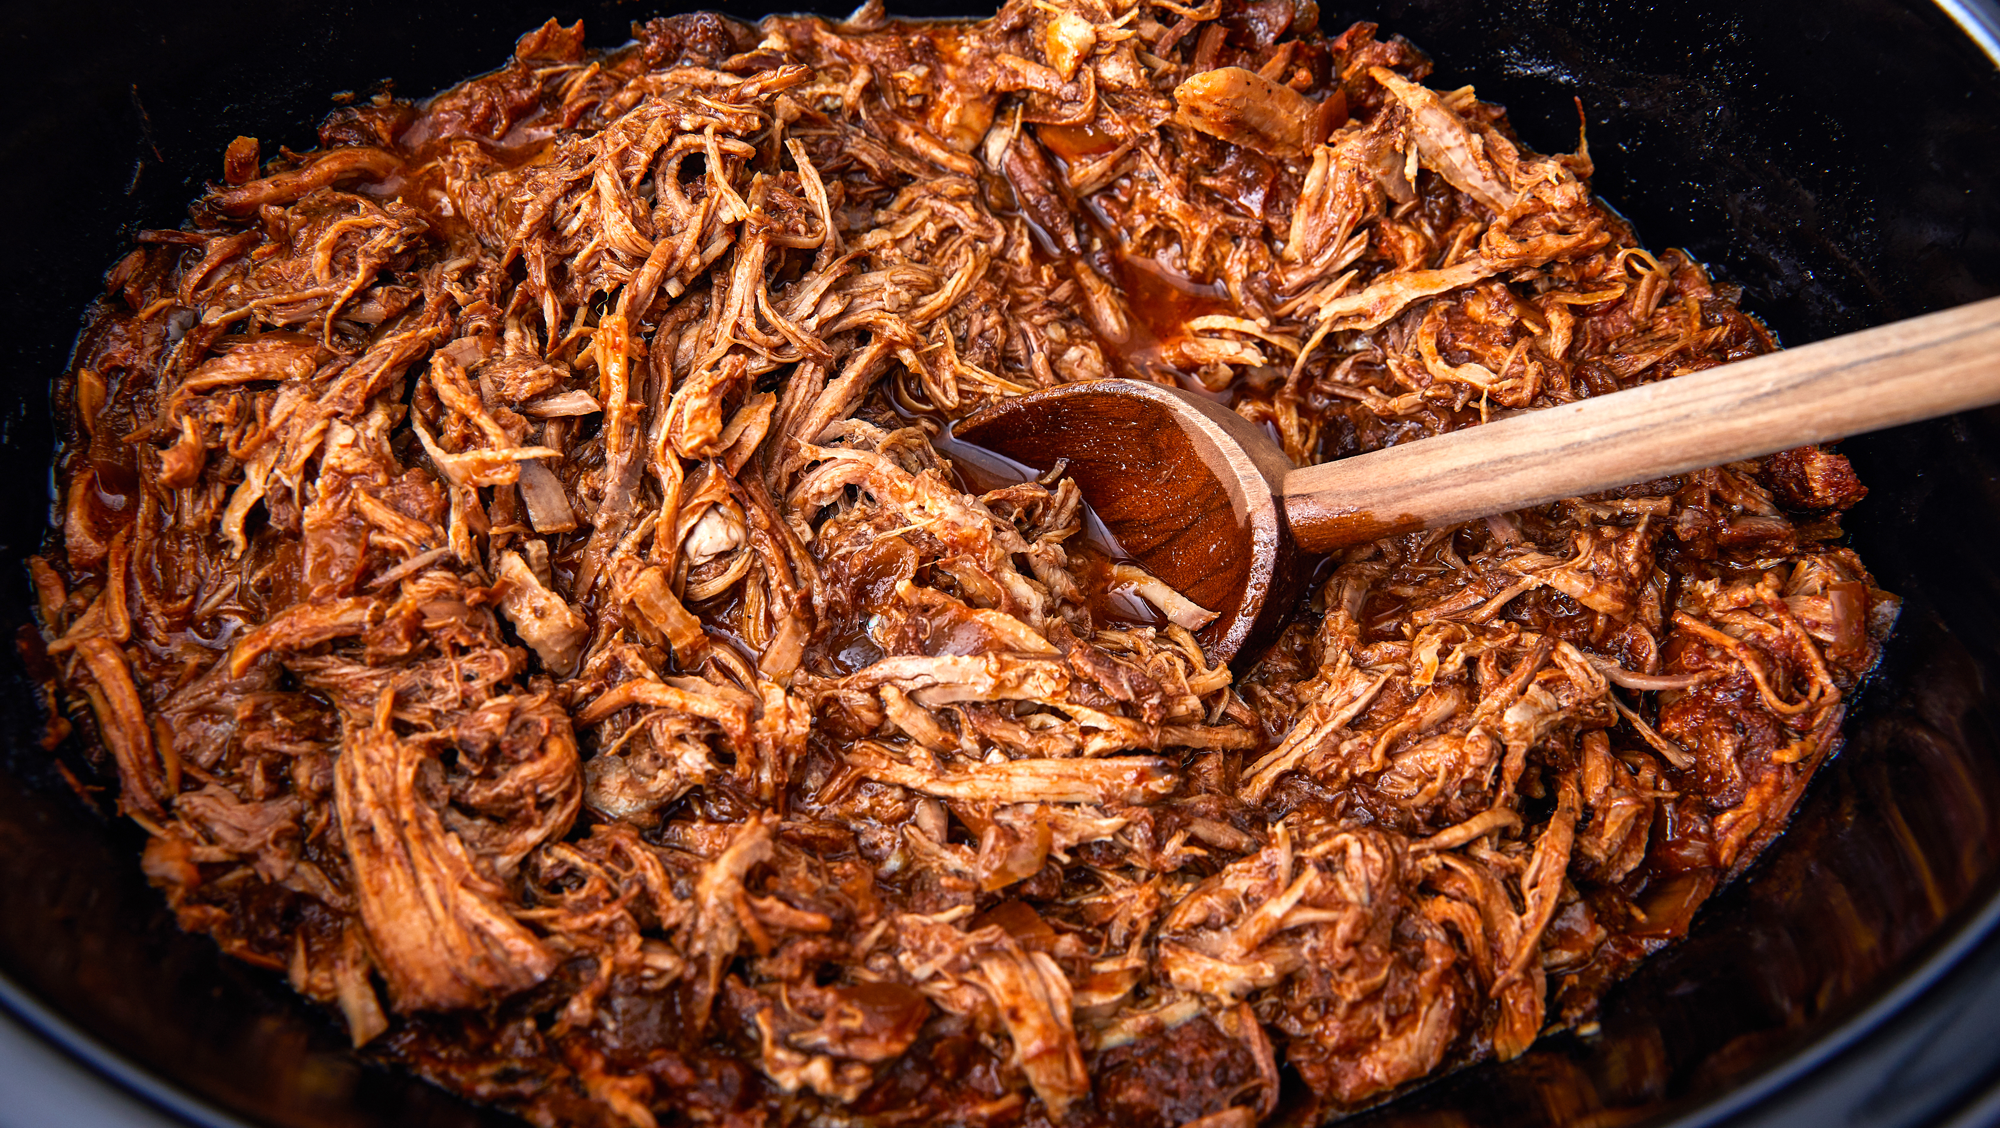 https://hips.hearstapps.com/hmg-prod/images/delish-slow-cooker-pulled-pork-horizontal-1539618655.png?crop=1.00xw:0.846xh;0,0.0907xh